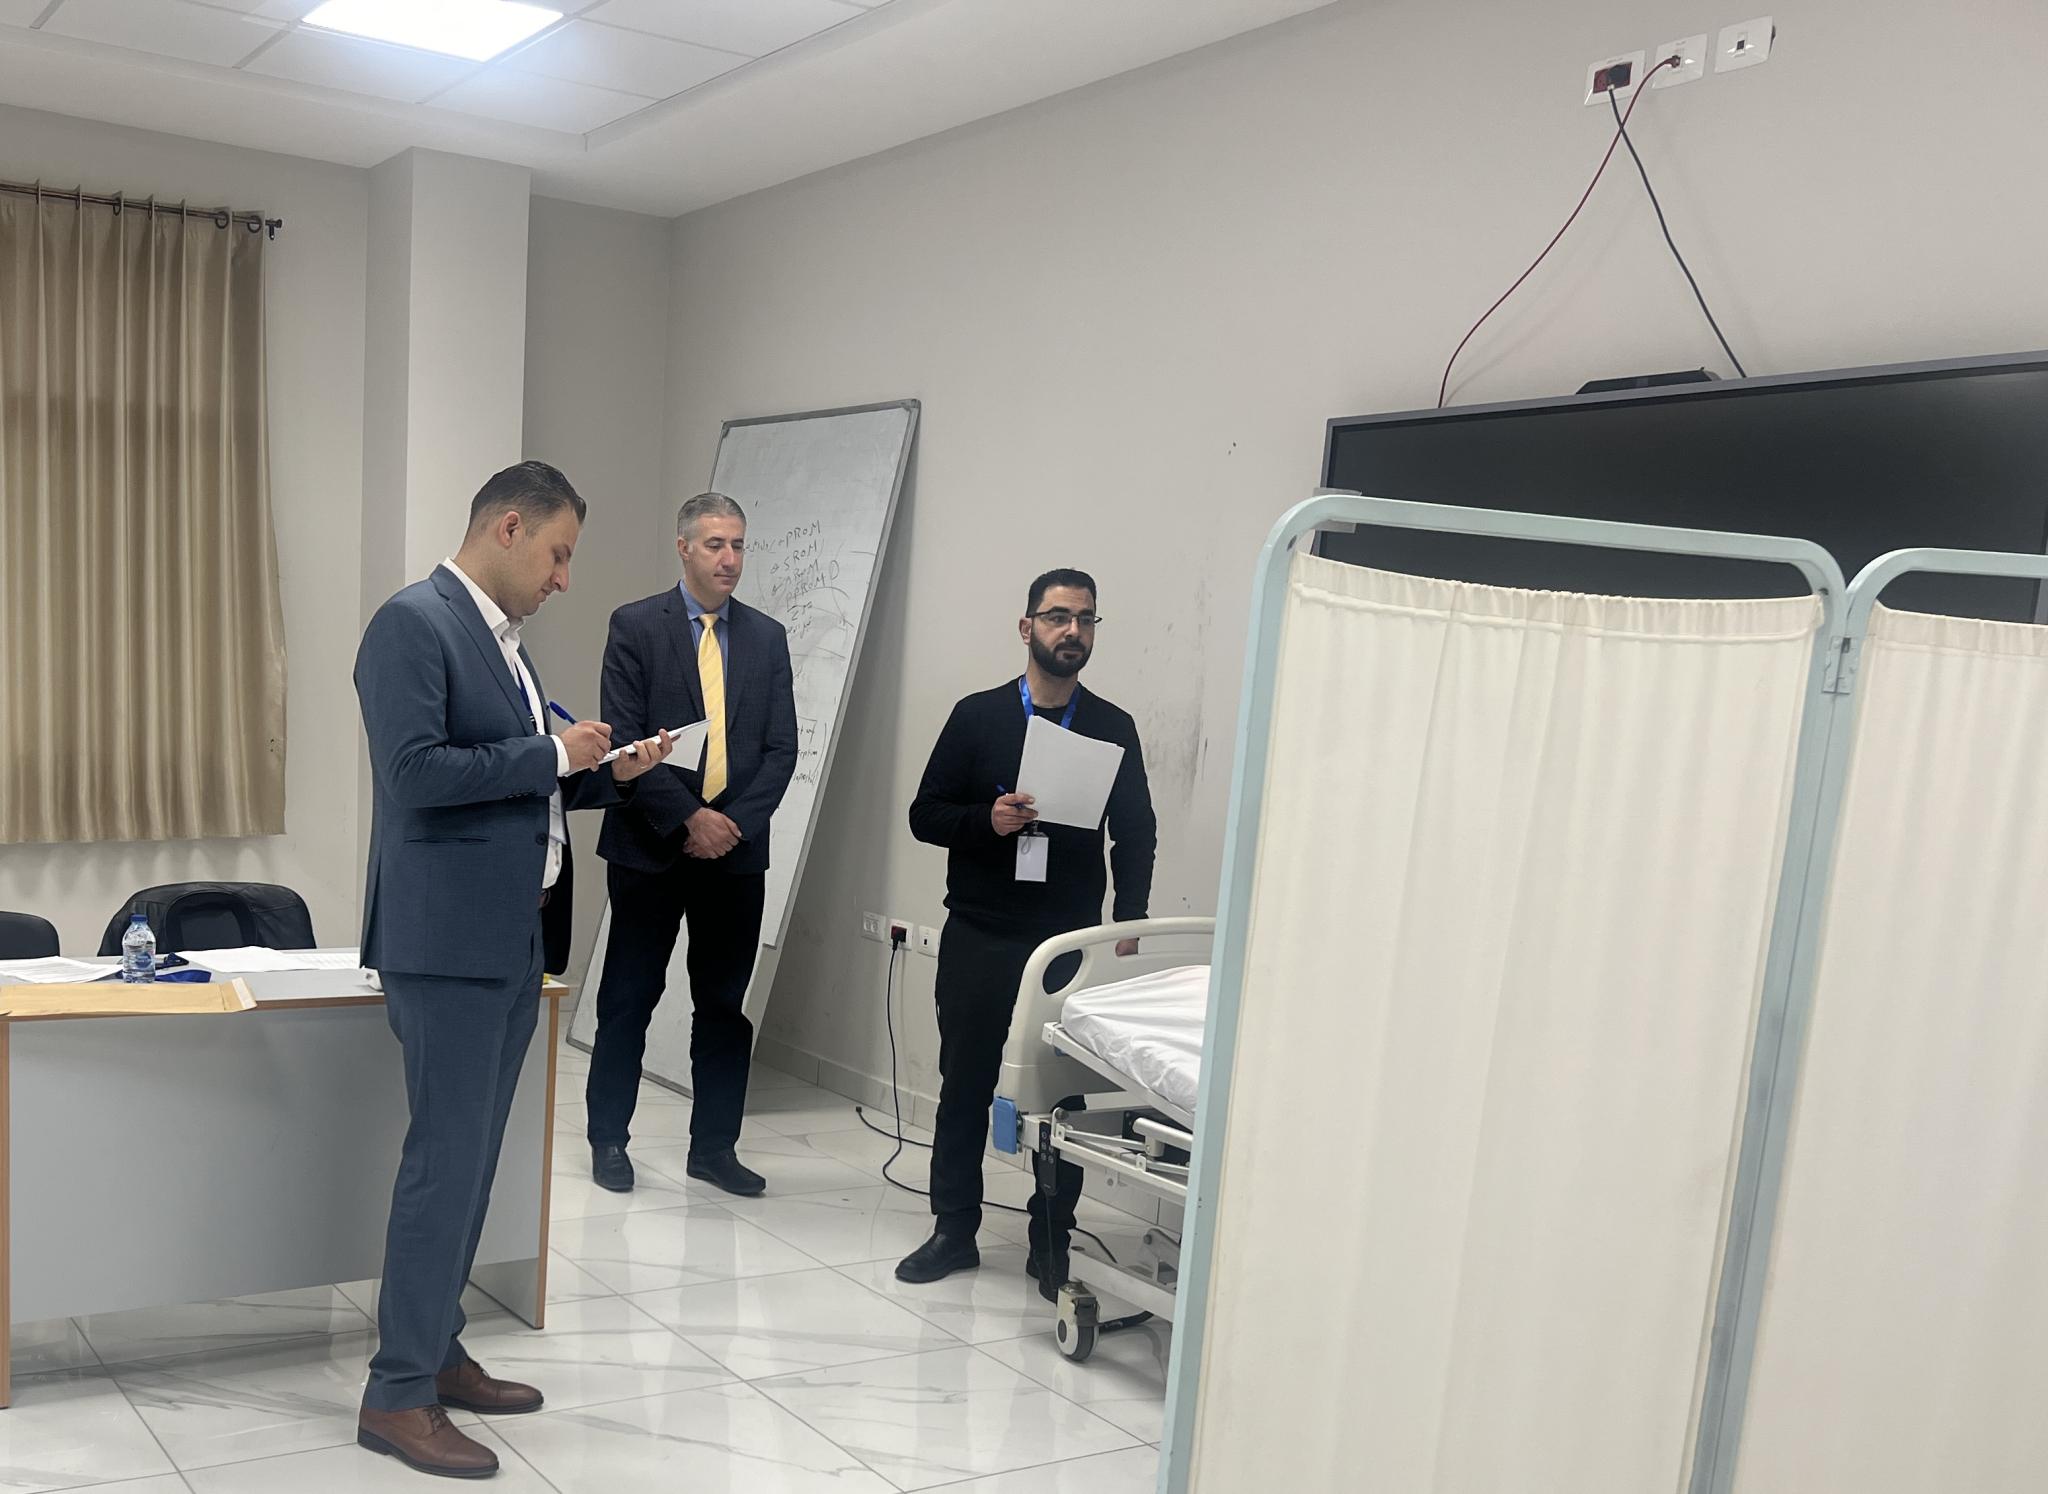 The Faculty of Medicine at the Arab American University Holds the Mini - OSCE Exam